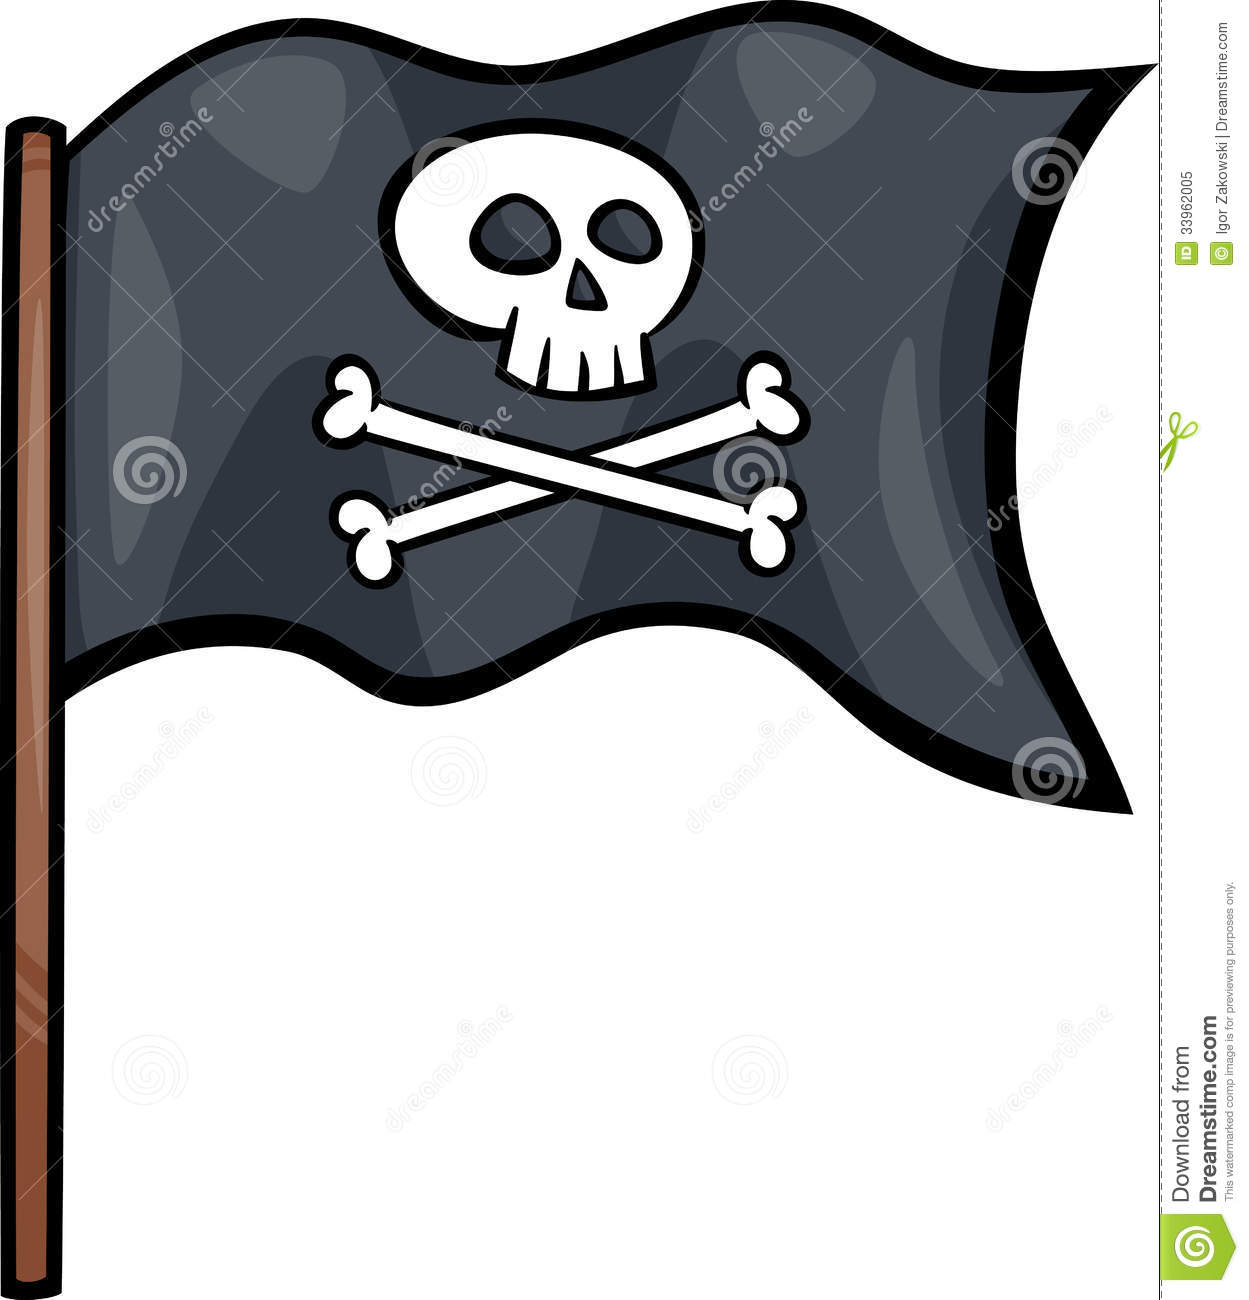 Of Pirate Flag With Skull And Bones Or Jolly Roger Object Clip Art